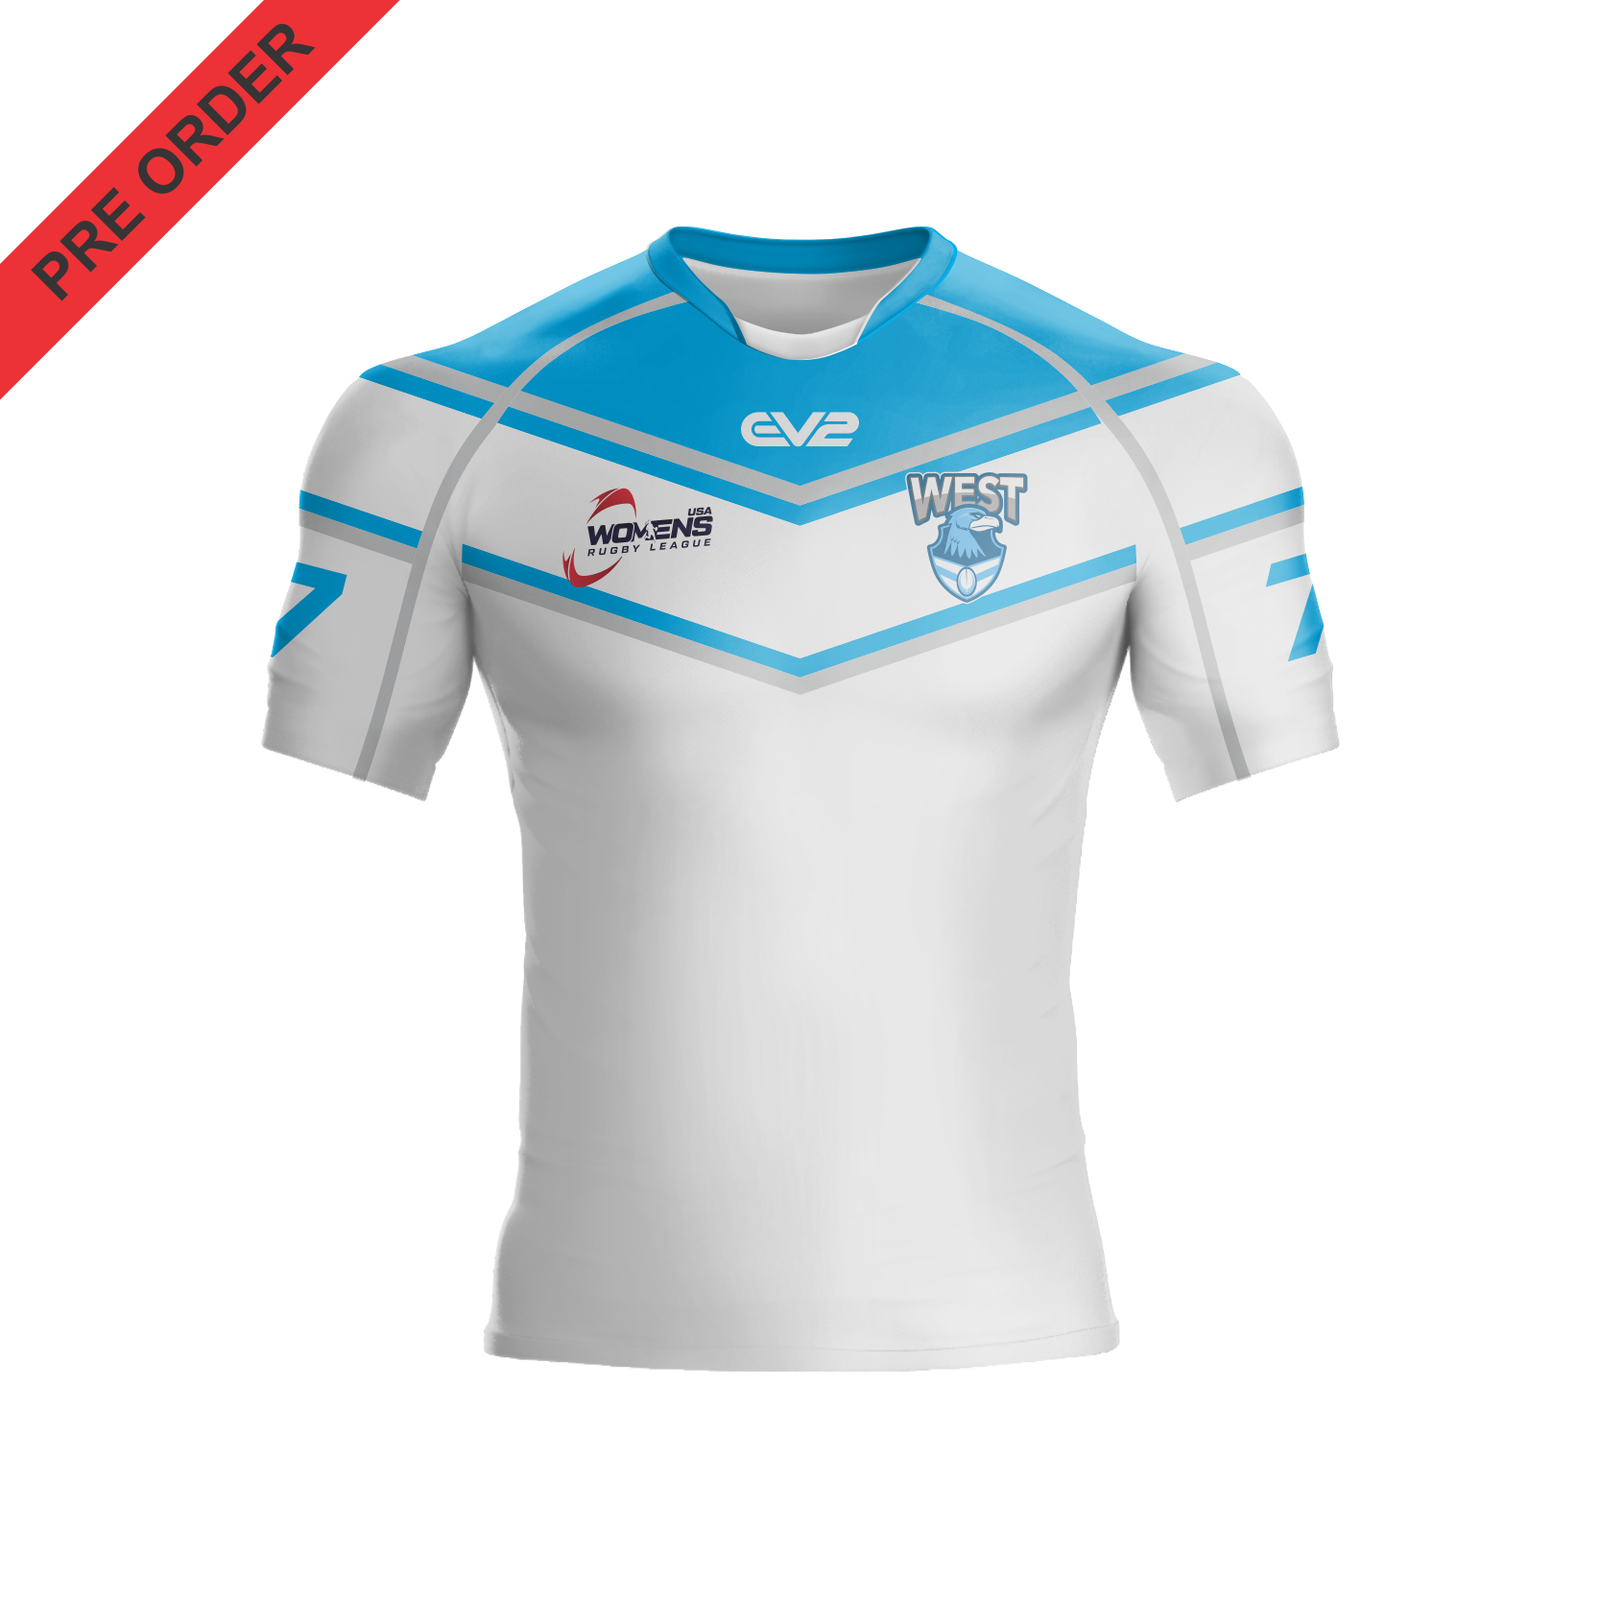 Wests Rugby League - Club Jersey